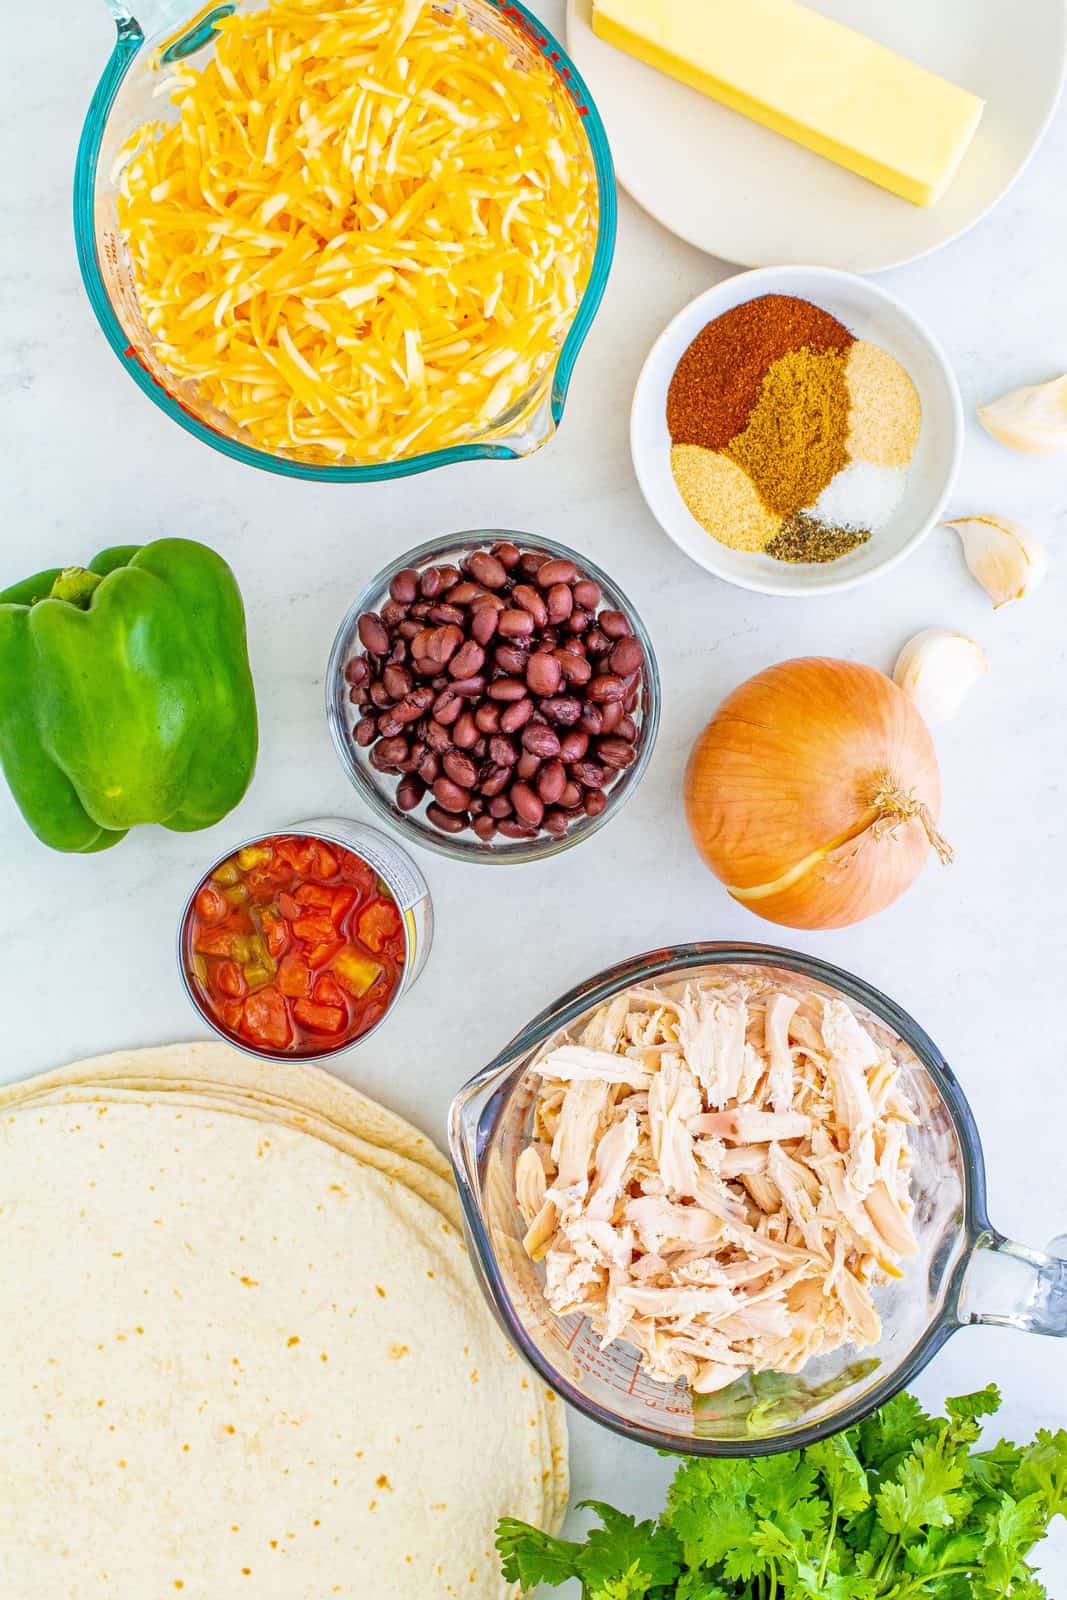 Ingredients needed: unsalted butter, onion, green bell pepper, garlic, chili powder, ground cumin, garlic powder, onion powder, kosher salt, pepper, chicken, black beans, rotel, cilantro, tortillas, colby jack cheese and your favorite toppings.